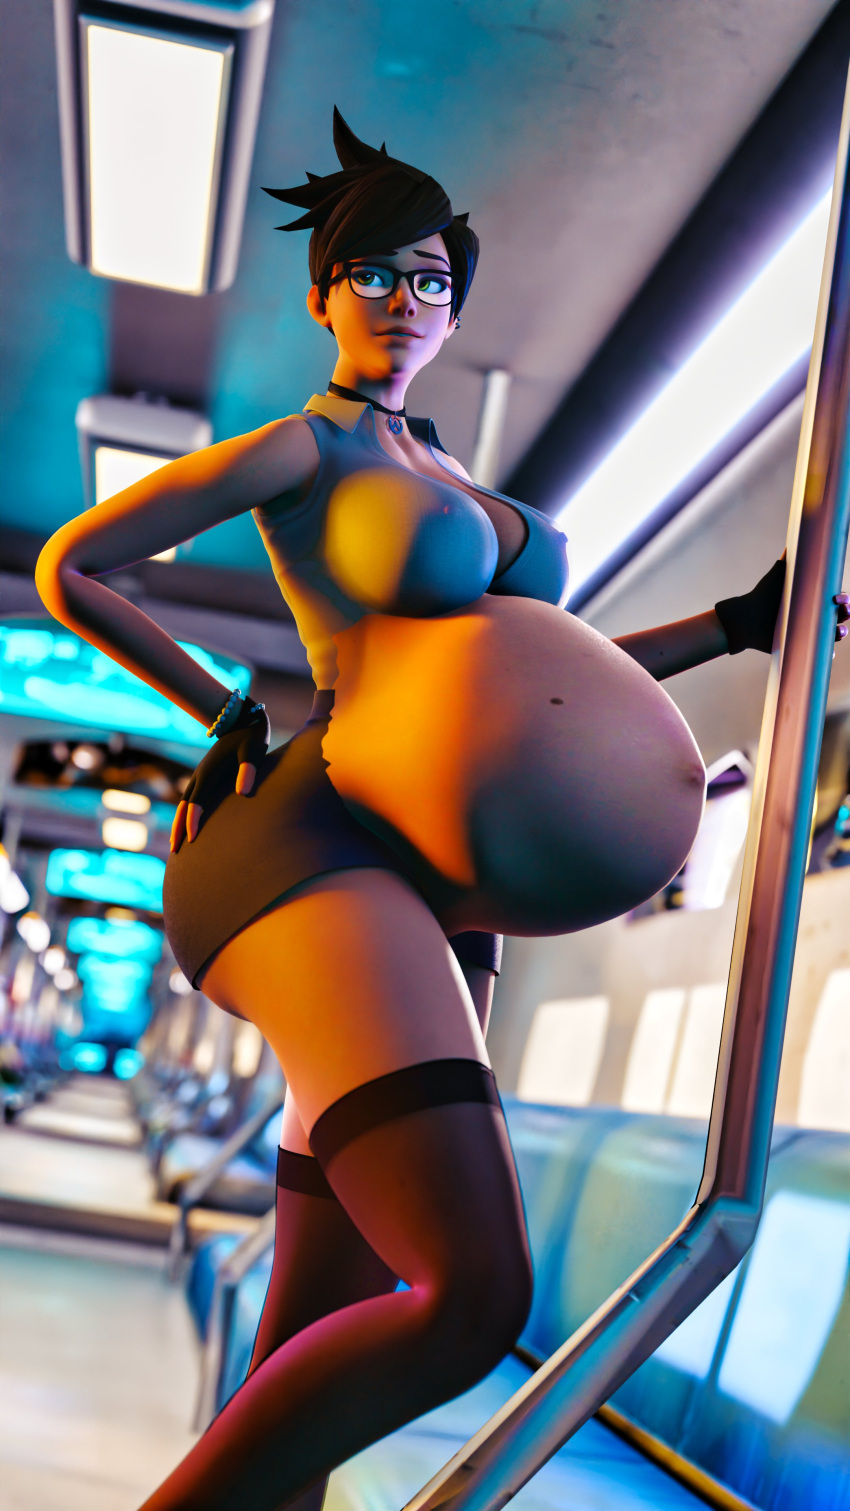 Belly 3d Porn - Overwatch Porn - Big Belly, Large Breasts, Clubzenny, Nipple Bulge, Ls,  Breasts, 3d - Valorant Porn Gallery